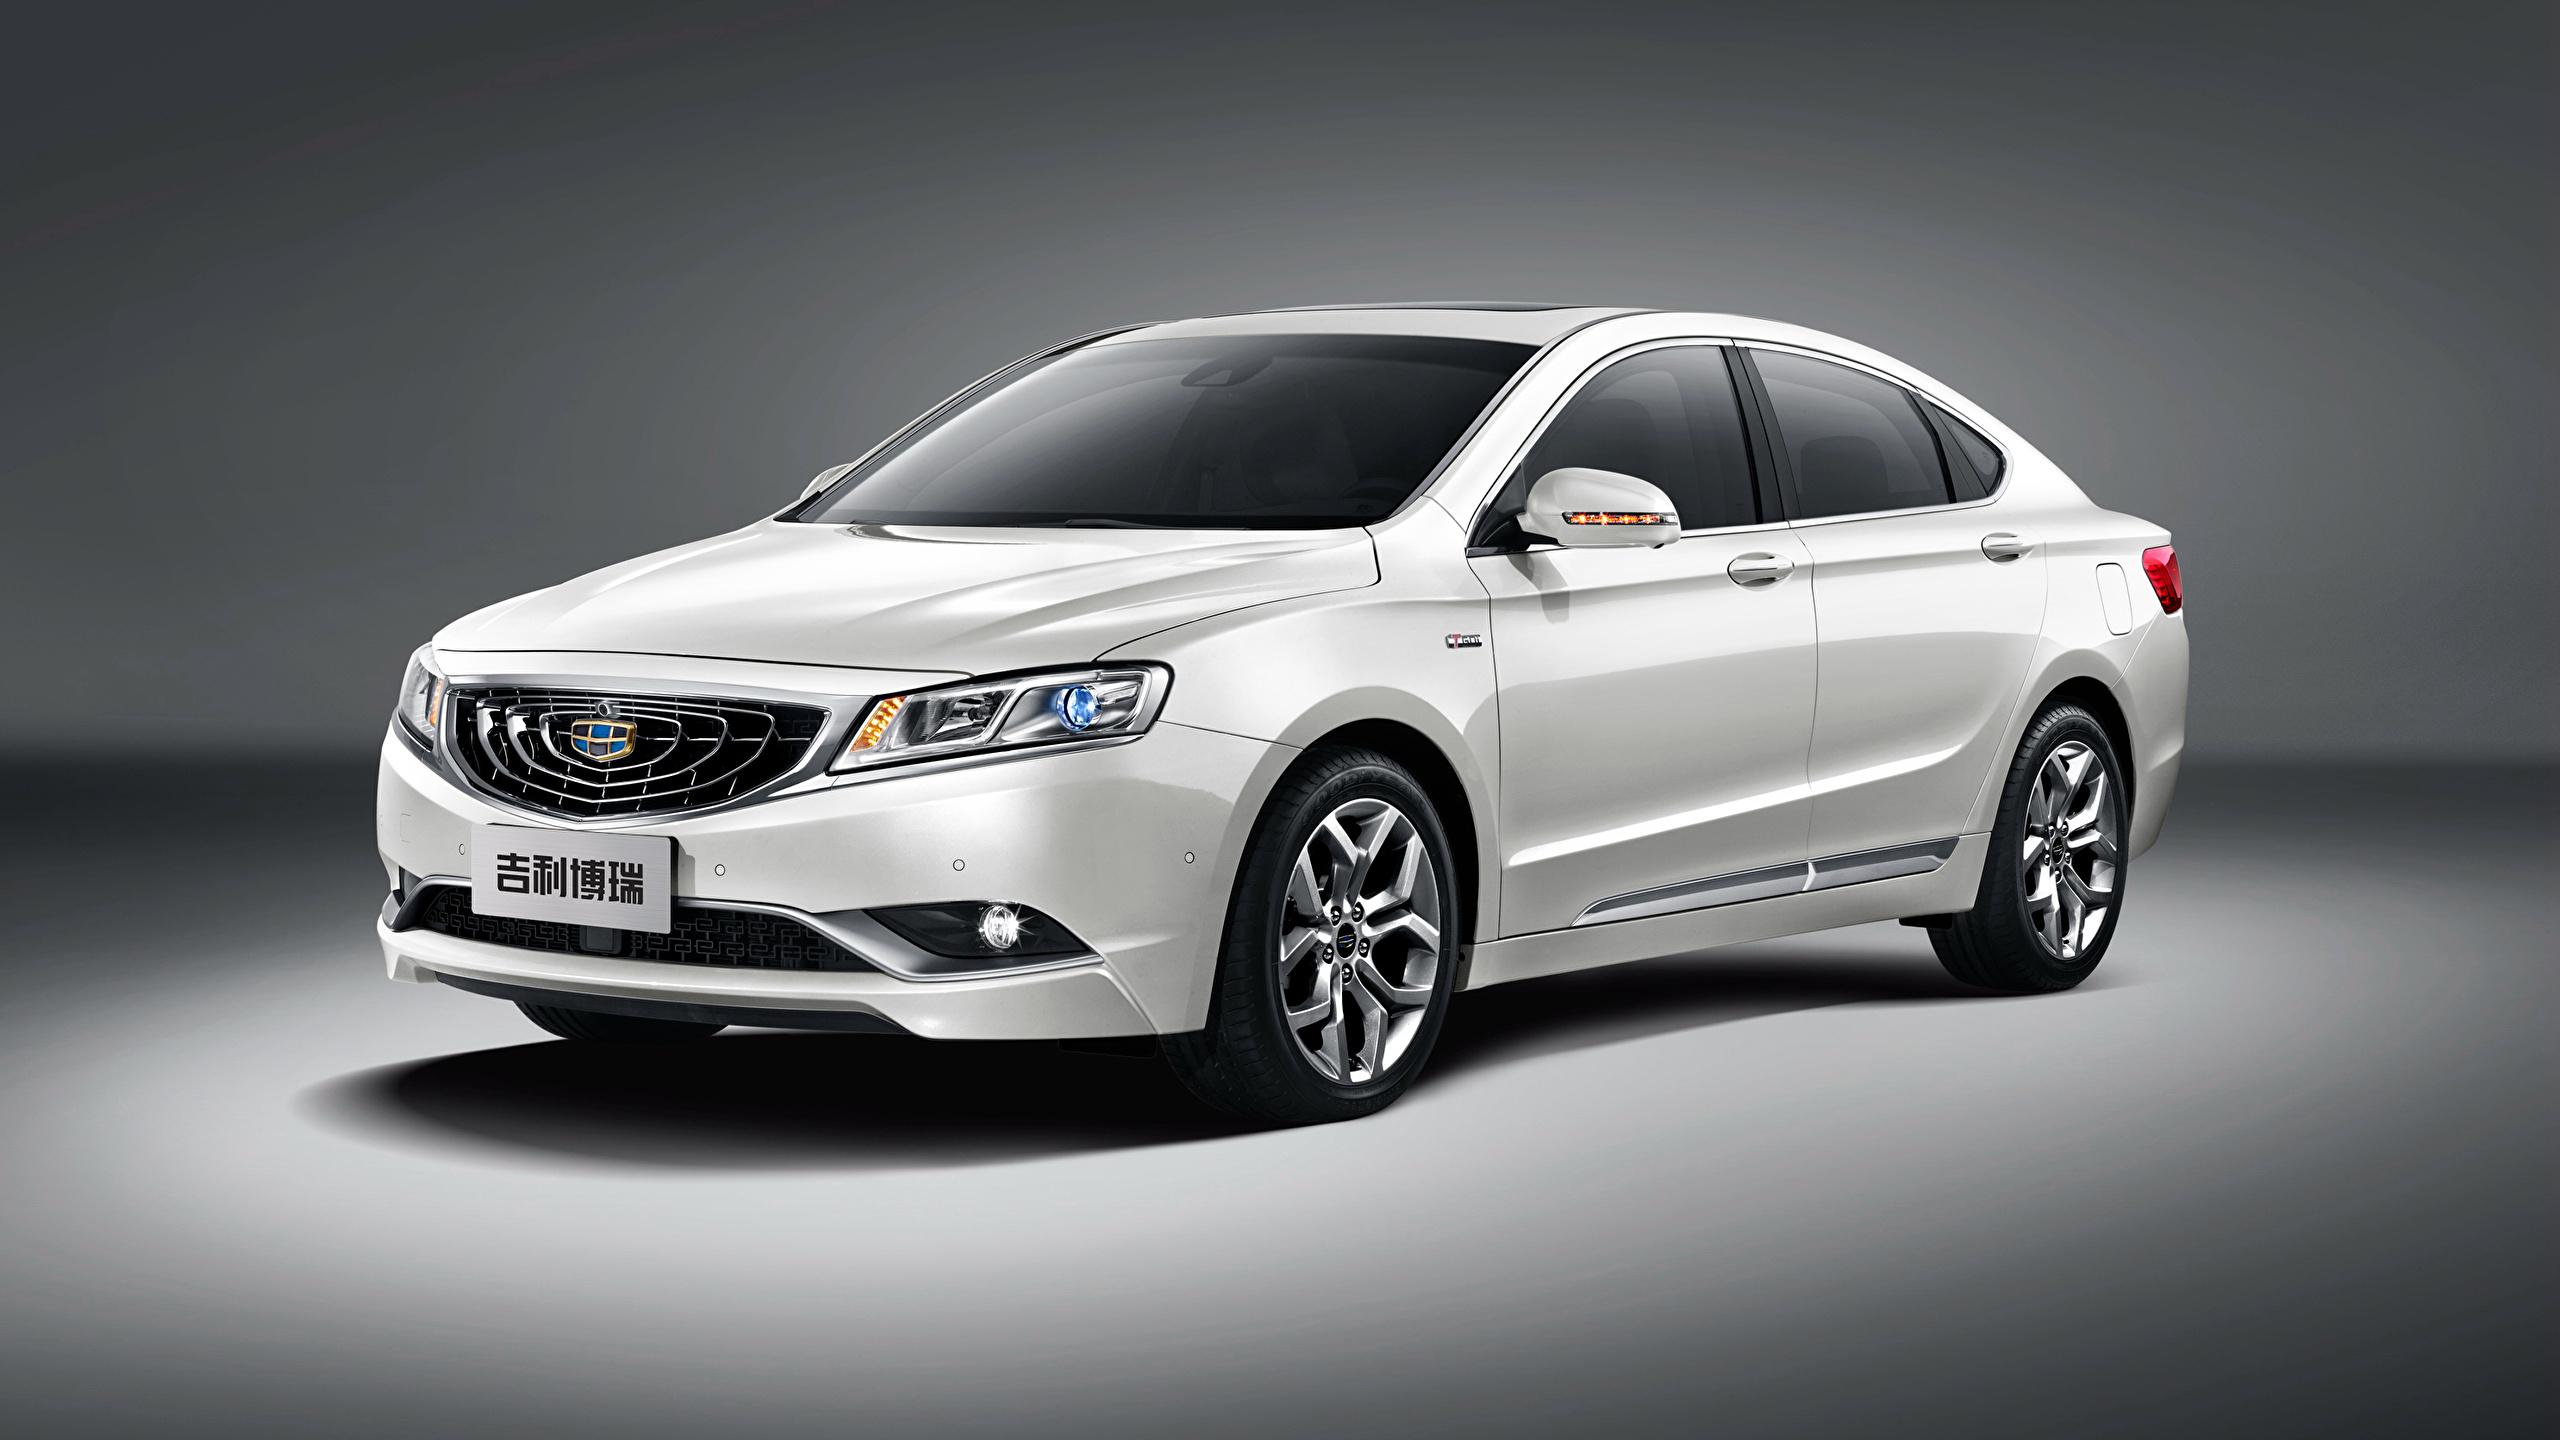 Picture 2015 Geely GC9 White Cars 2560x1440